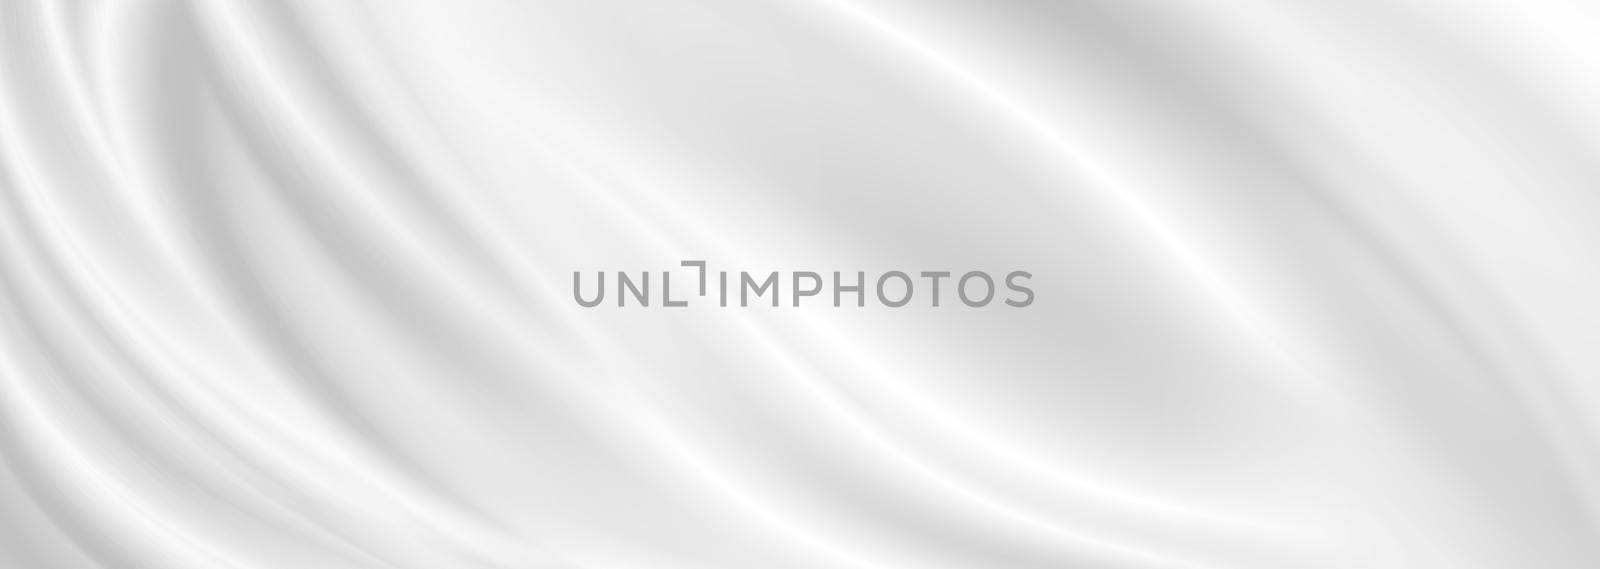 Abstract white fabric background with copy space 3D illustration